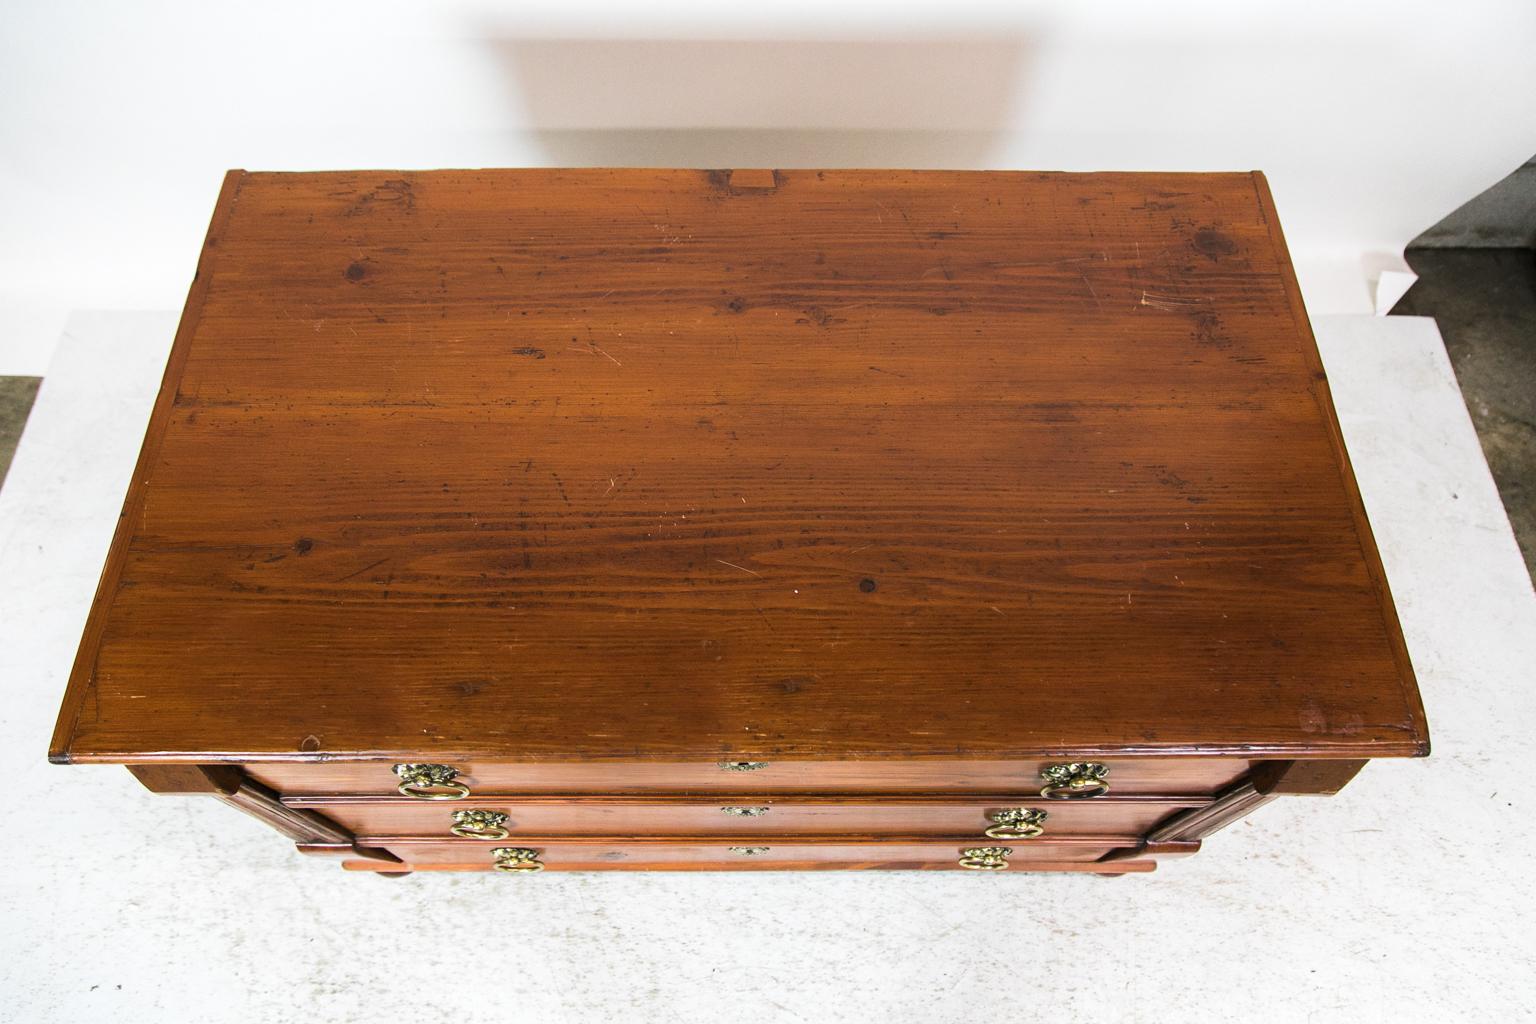 The front of this Central European pine chest is designed with two top drawers being dummy disguising the lift top blanket chest interior. The lower drawer is functioning. The drawer dividers have molded shapes. The drawers are framed with carved